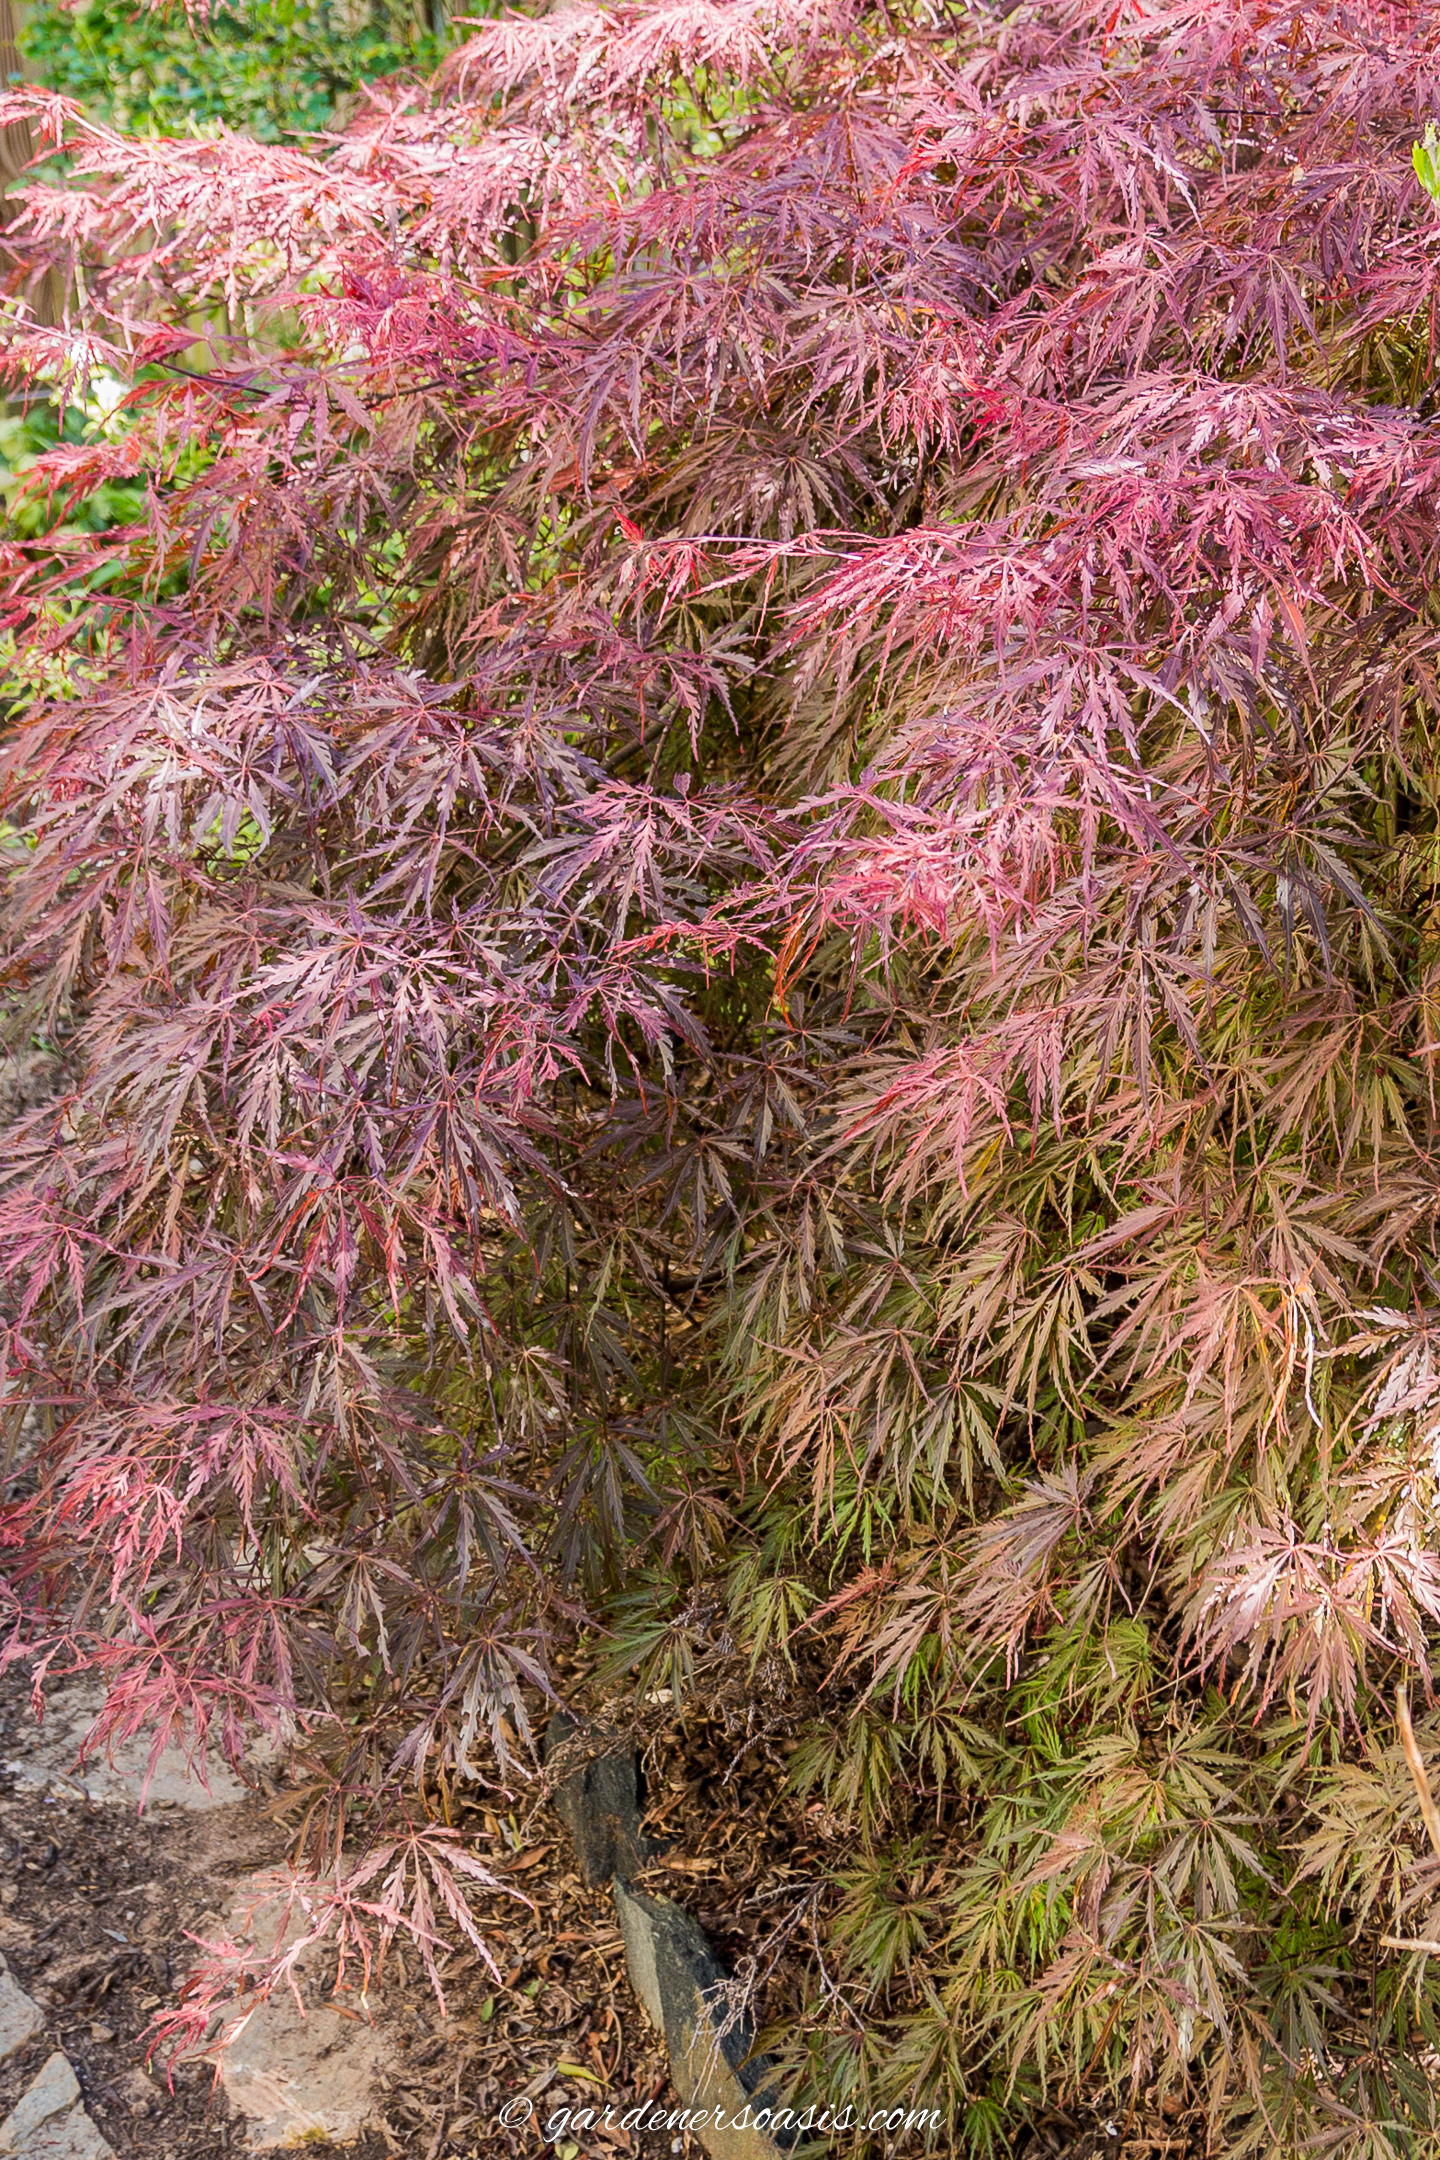 Acer Palmatum 'Scarlet Princess' with red leaves on top and green ones underneath